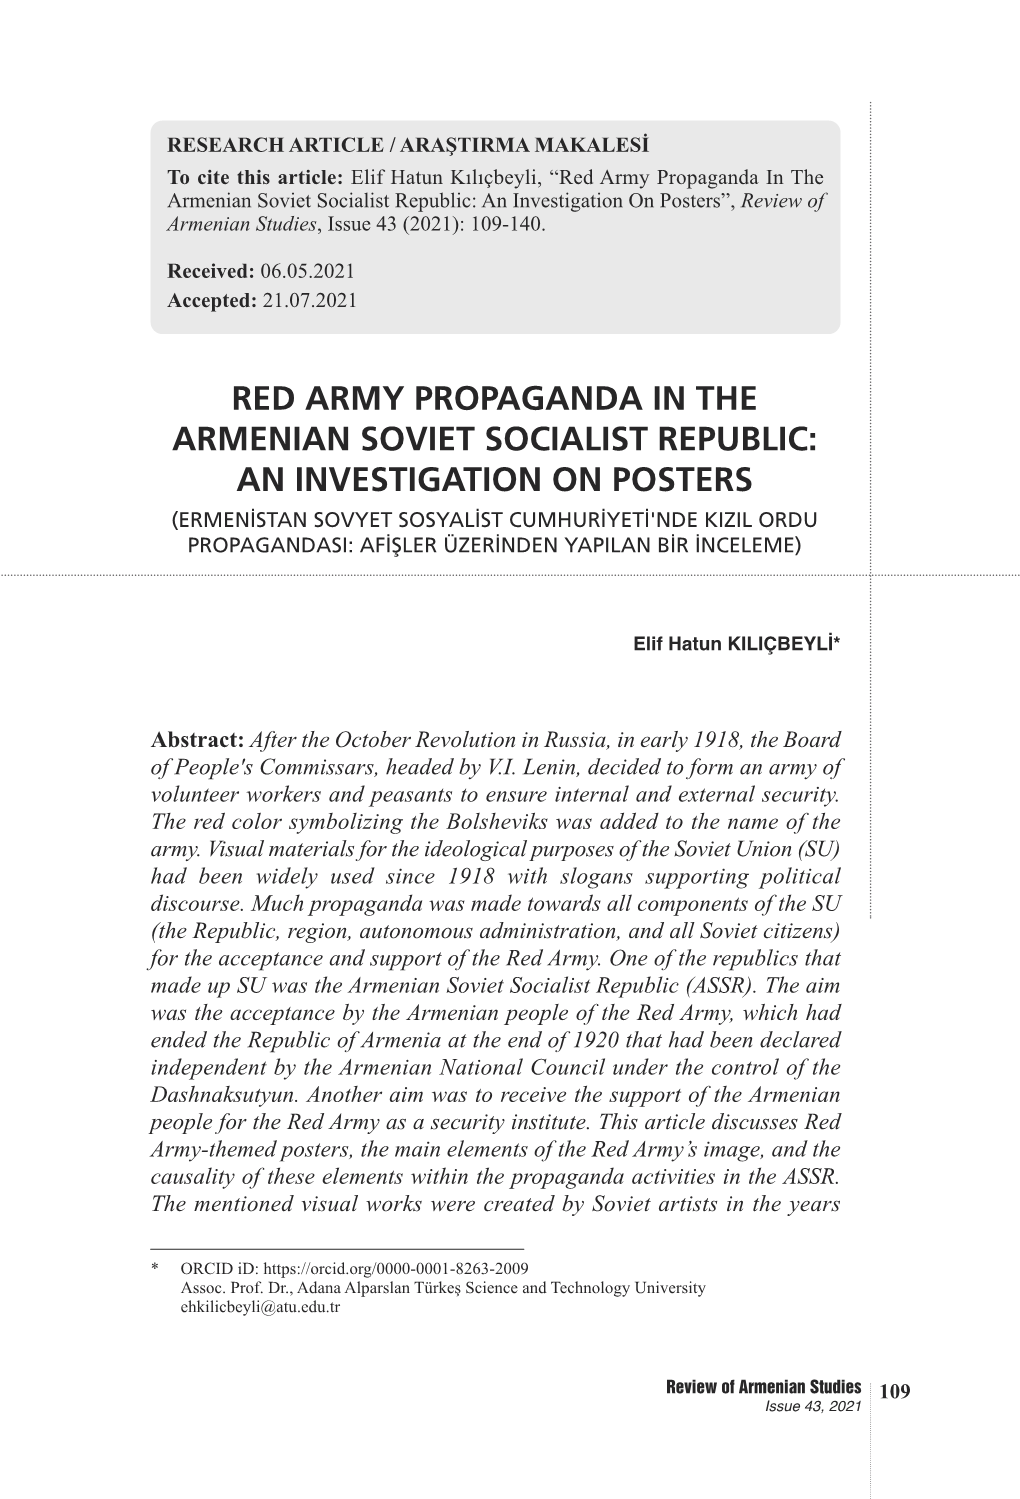 Red Army Propaganda in the Armenian Soviet Socialist Republic: an Investigation on Posters”, Review of Armenian Studies, Issue 43 (2021): 109-140